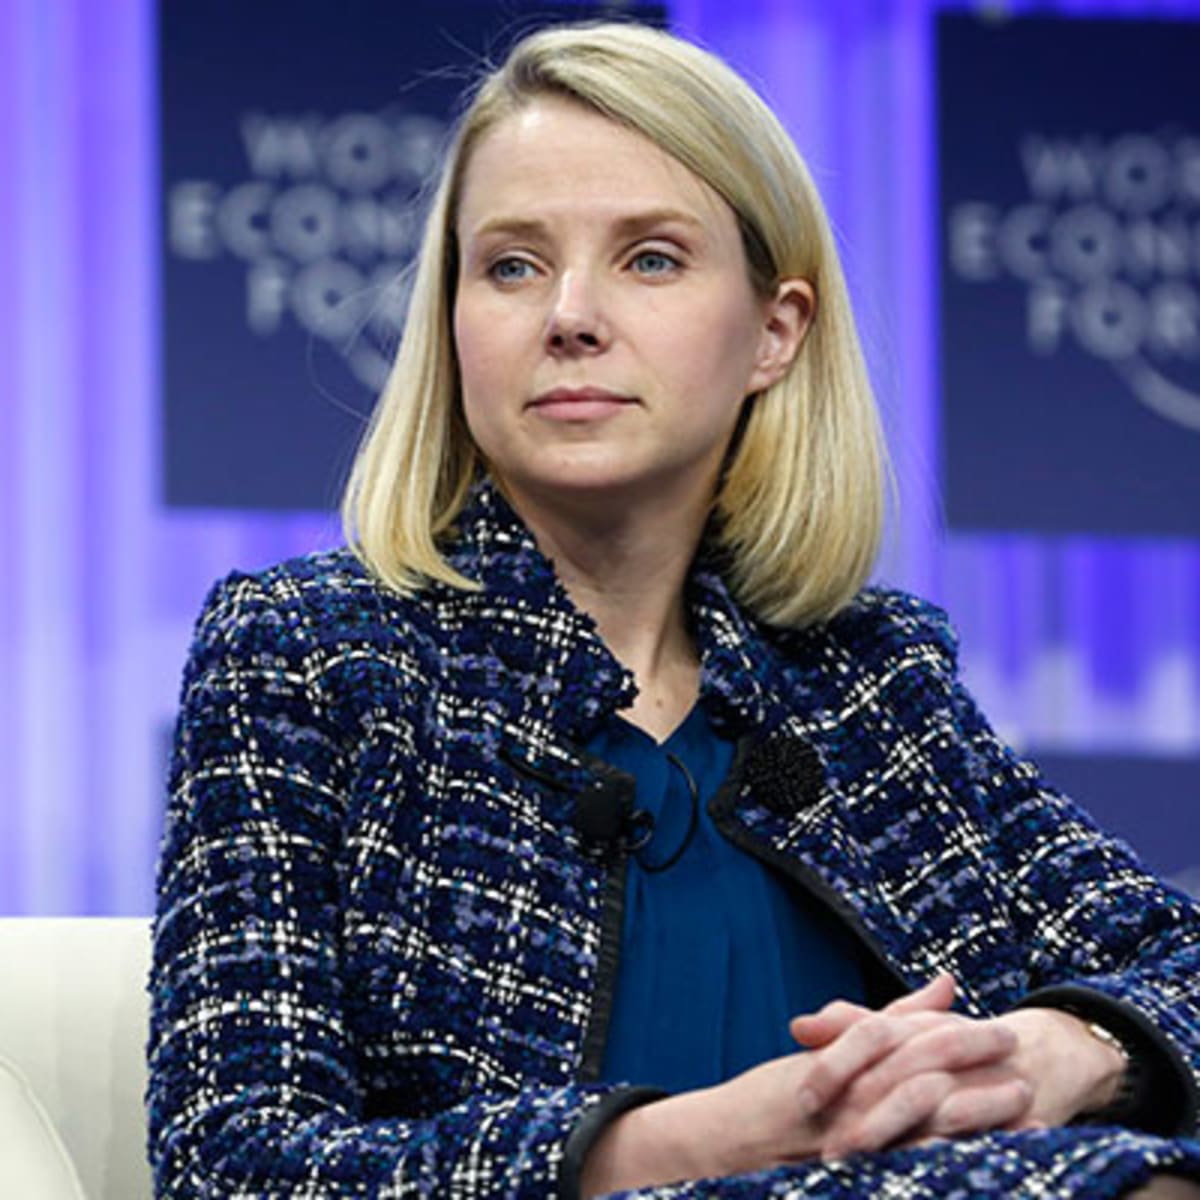 Why Yahoos (YHOO) Streaming of an NFL Game for Free Is a Big Win for Marissa Mayer